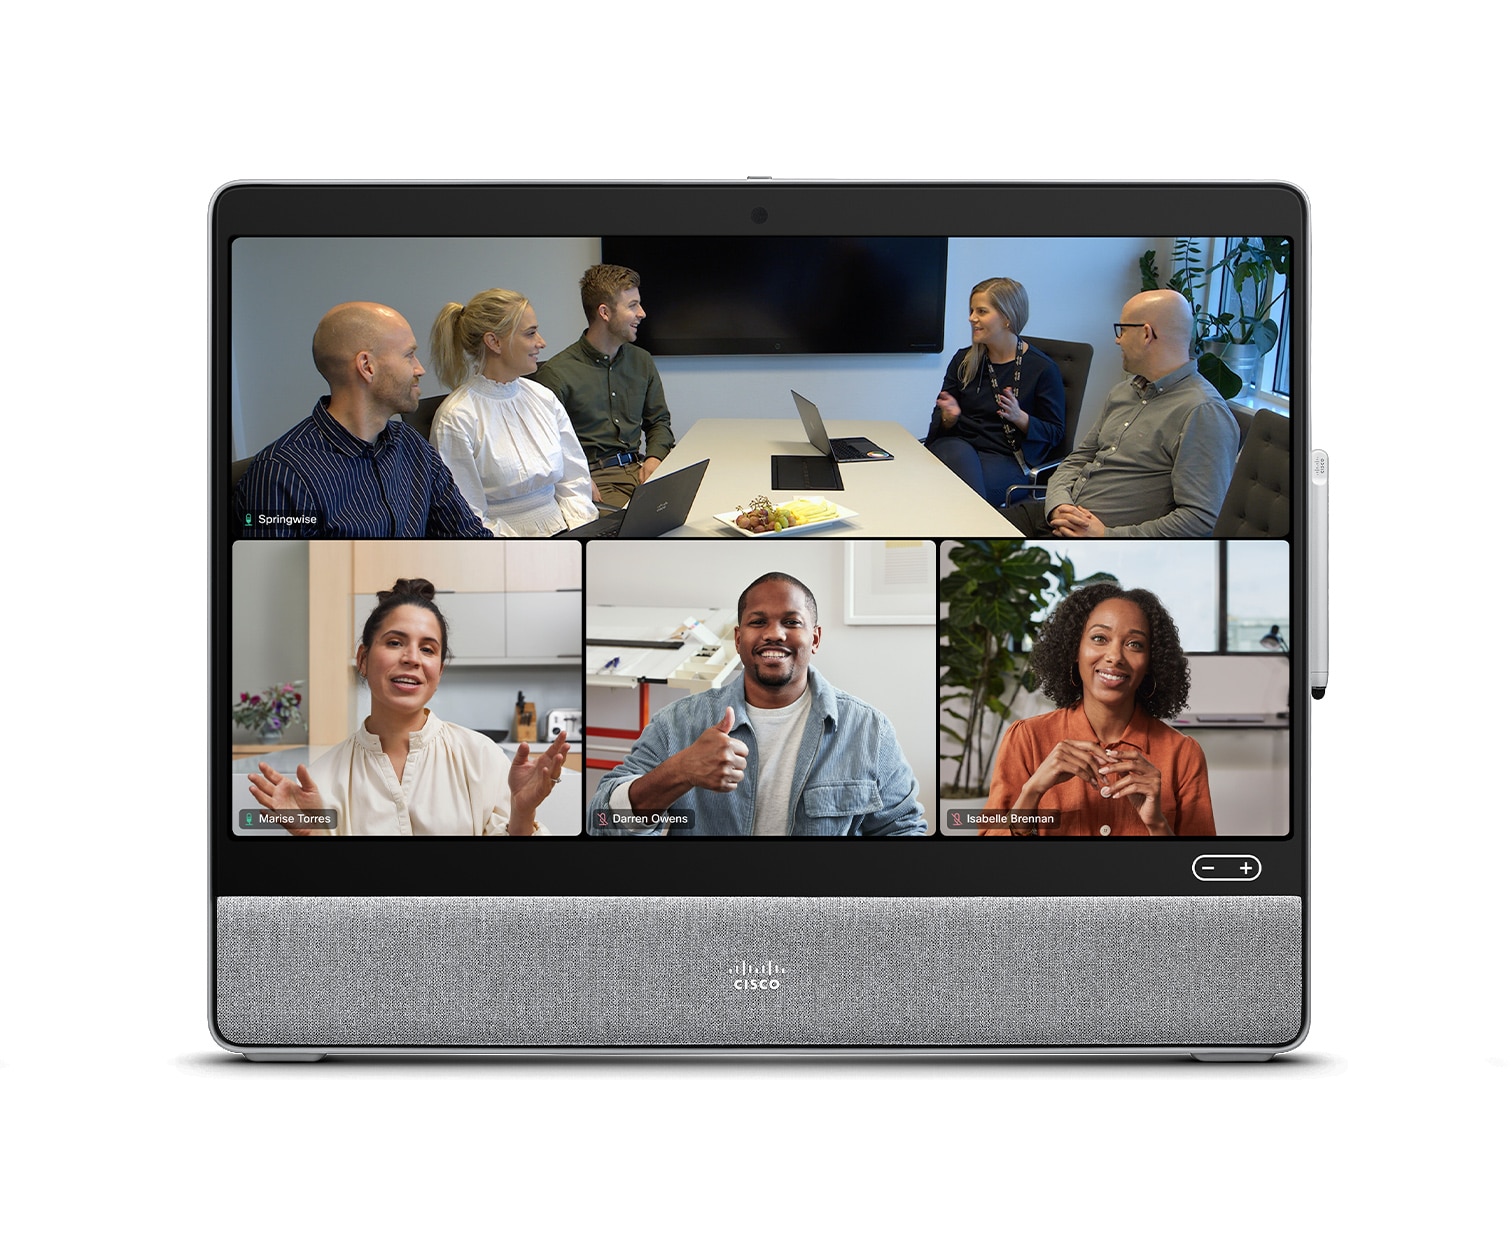 People Focus view on Cisco Desk device with Webex meeting platform and 5 people selected for video conference.